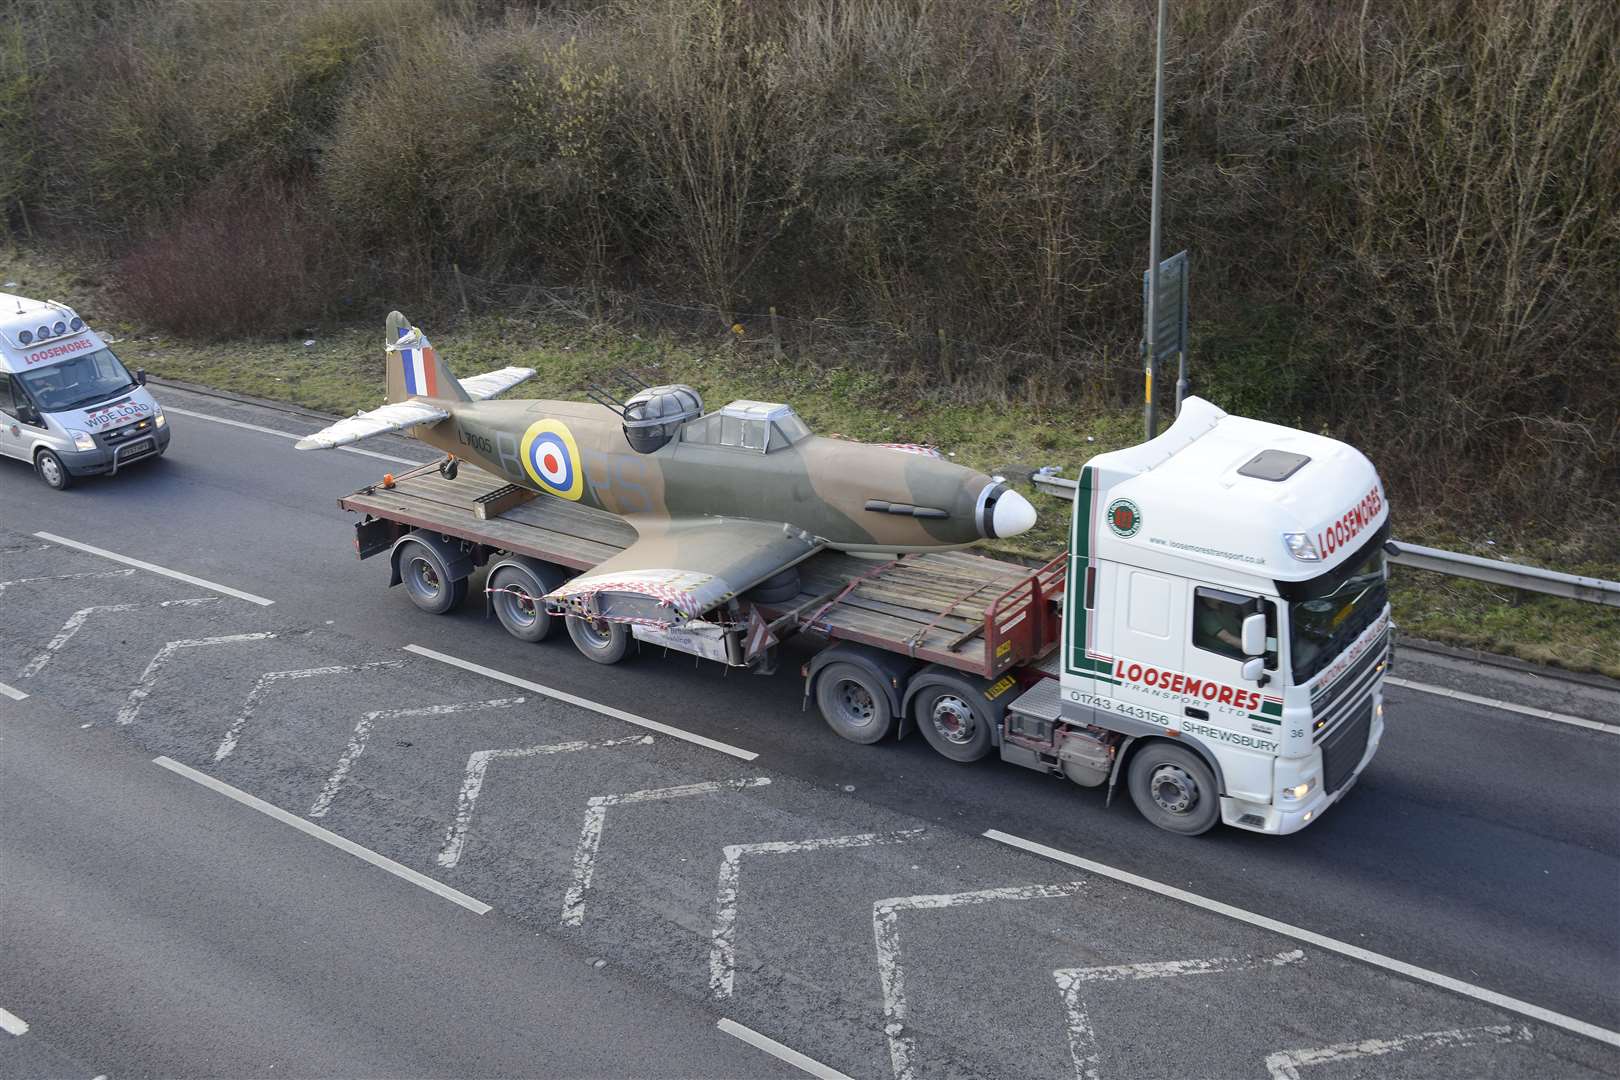 The Boulton Paul Defiant replica, reaching the end of its journey to Hawkinge.